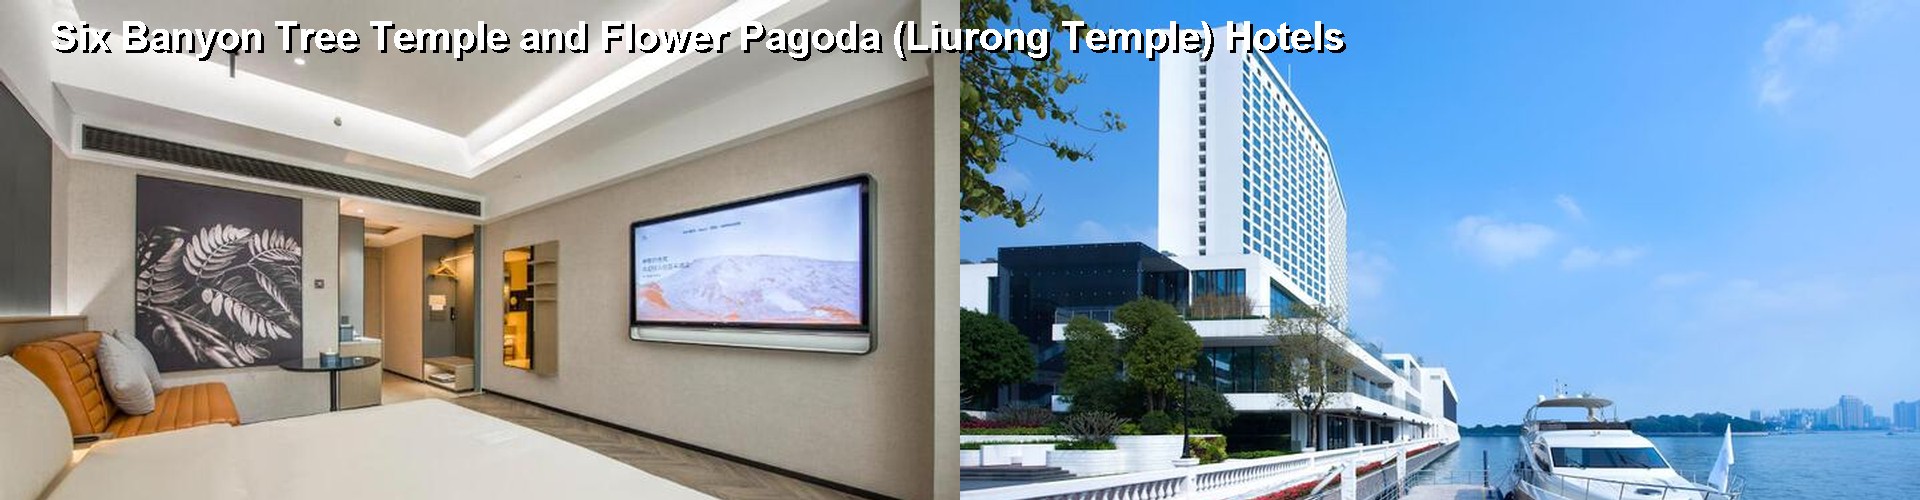 3 Best Hotels near Six Banyon Tree Temple and Flower Pagoda (Liurong Temple)